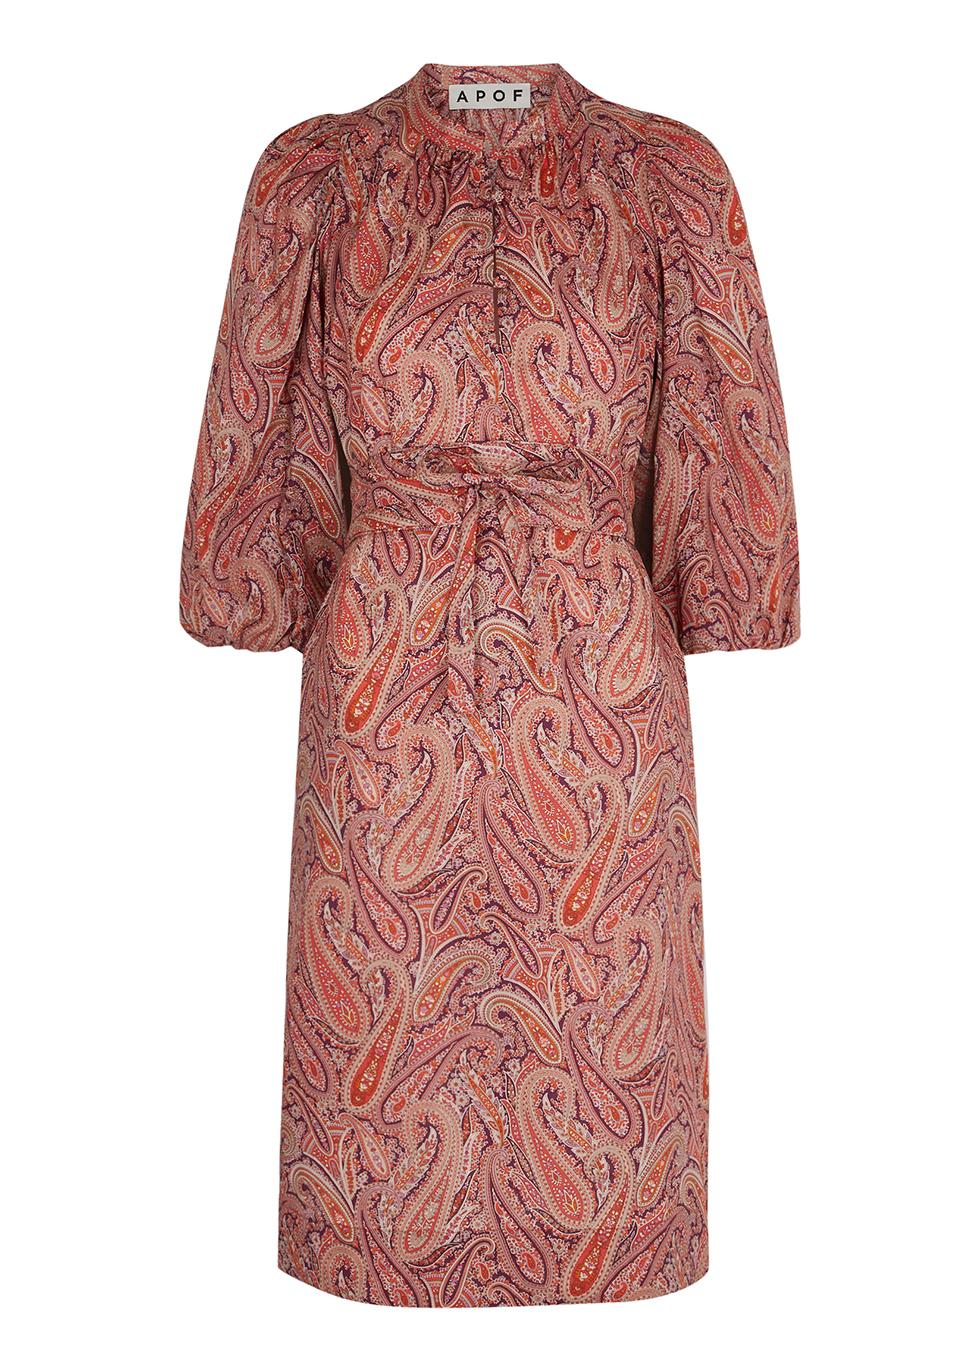 Madeline paisley-print cotton dress by APOF